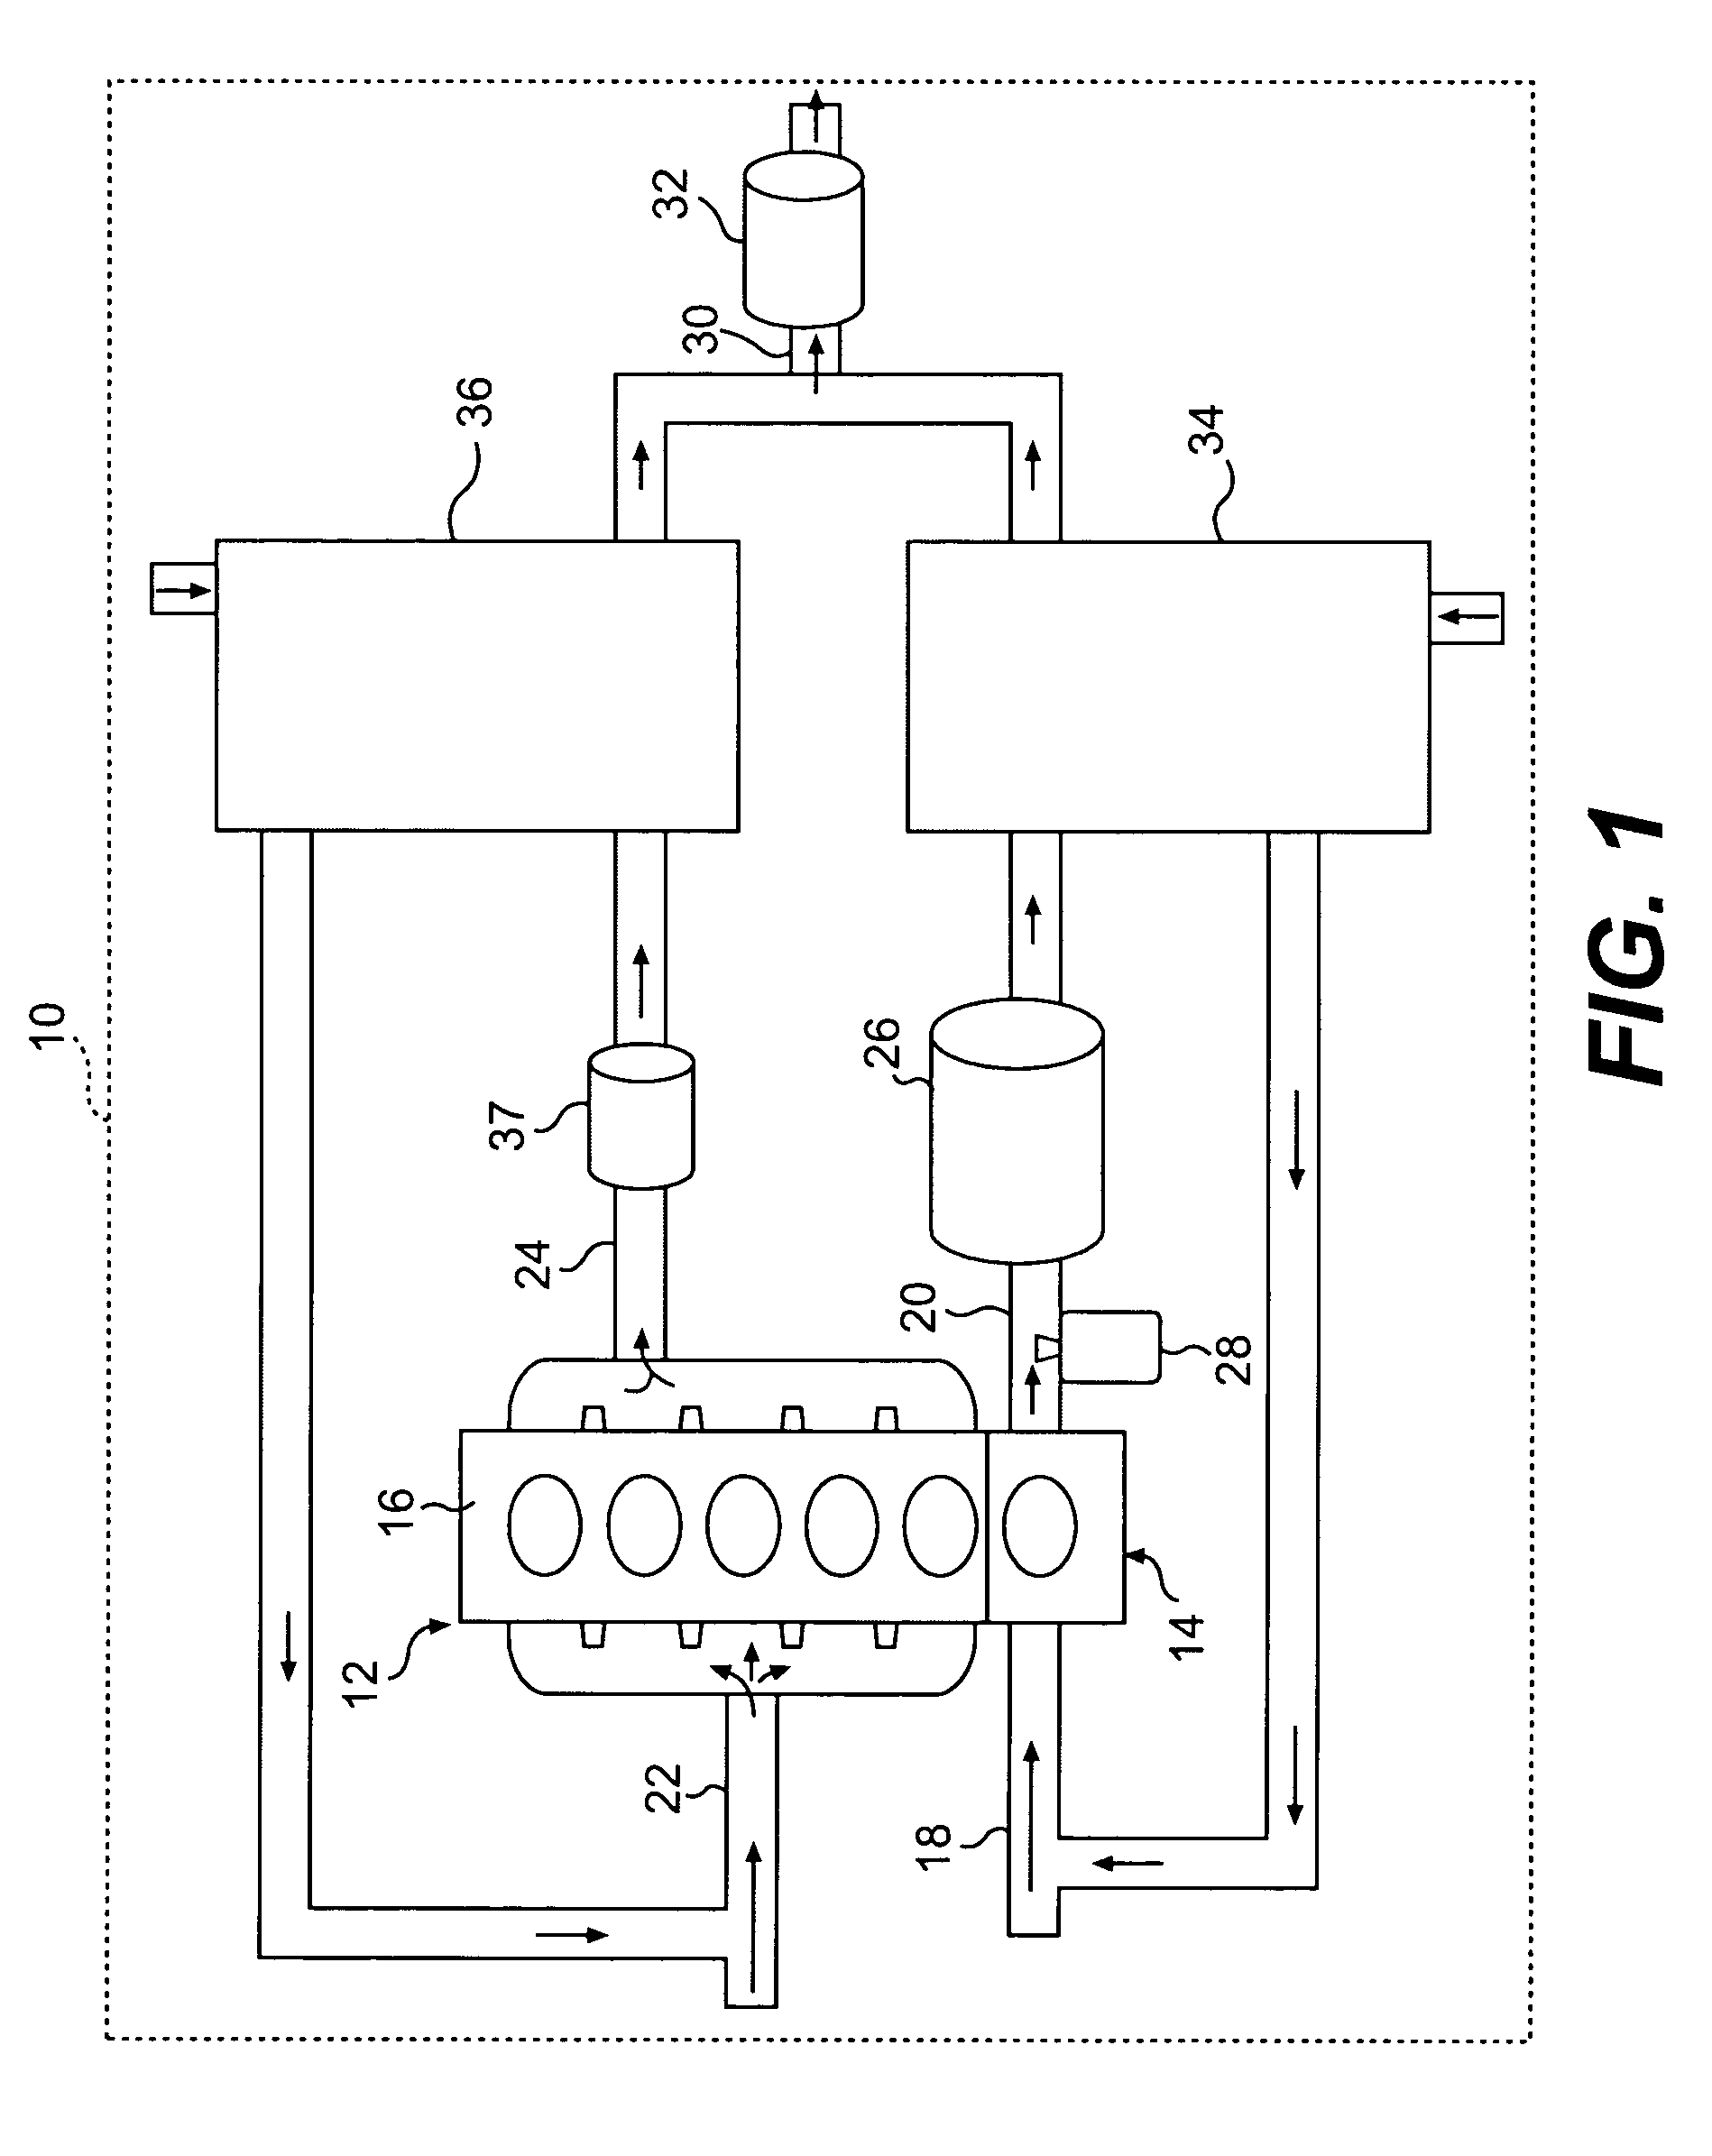 Exhaust purification with on-board ammonia production